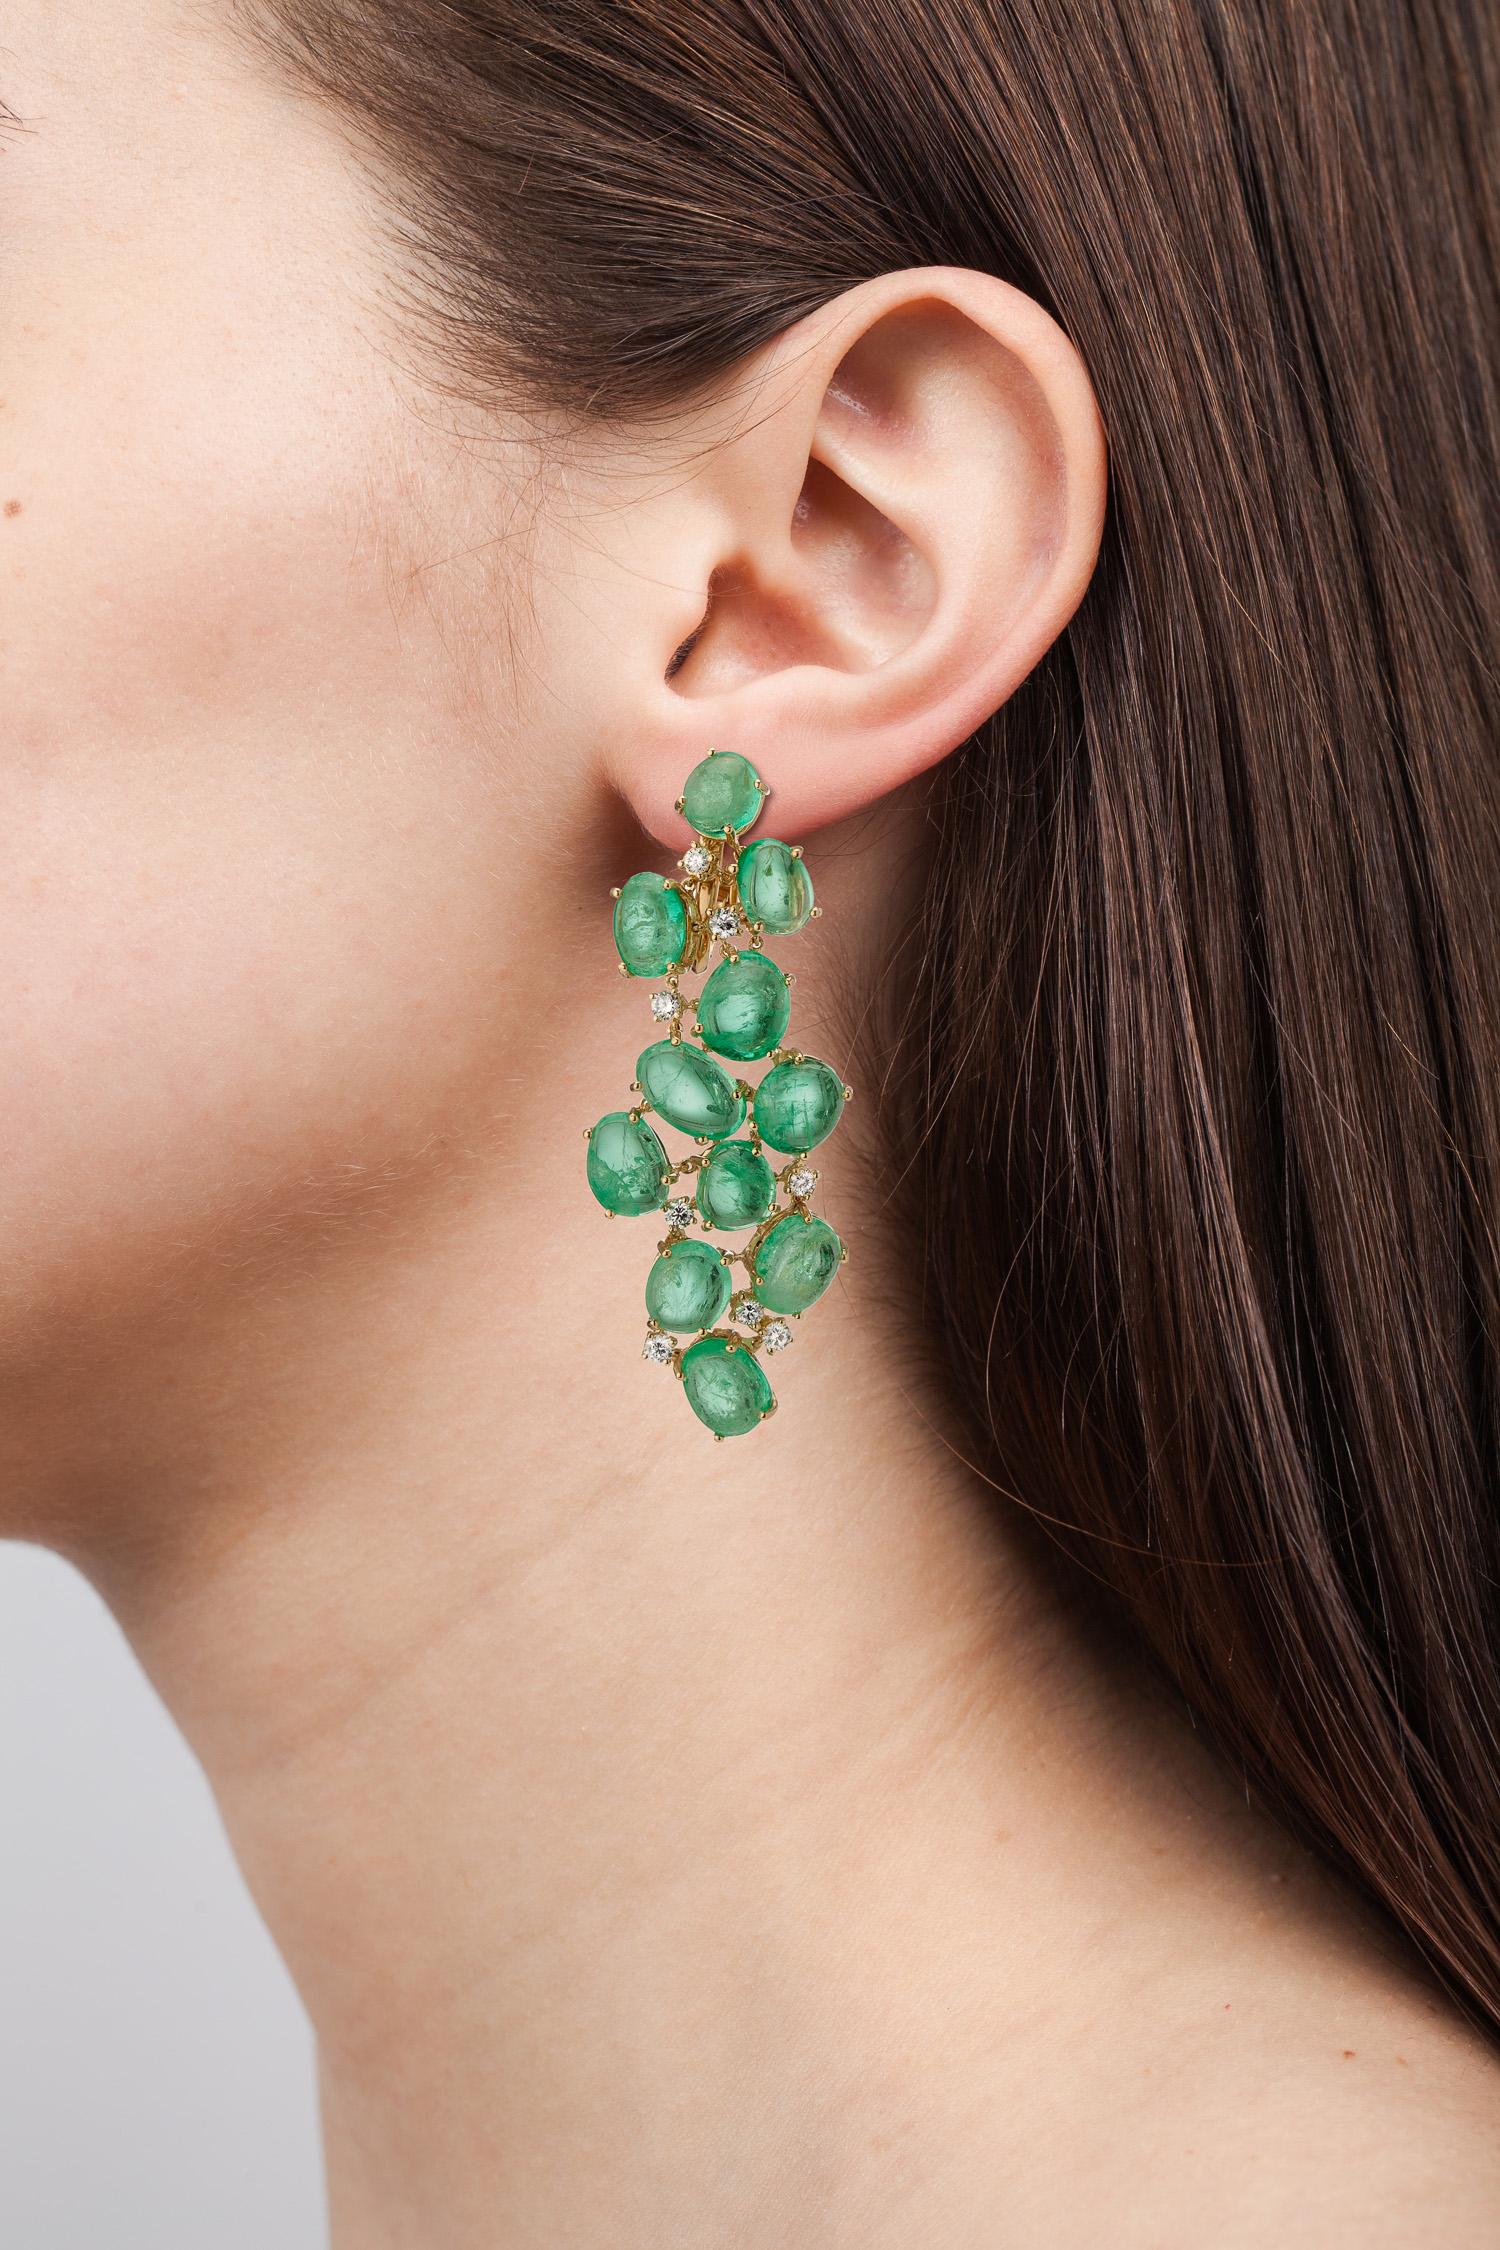 Baroque style earrings set with 50.91 carats of Muzo Colombian emeralds set with 0.92 carats of round brilliant diamonds.

Muzo Emerald Colombia Heritage Muisca Earrings set with 50.91 carats Emerald.

Named in honor of the ancient indigenous people